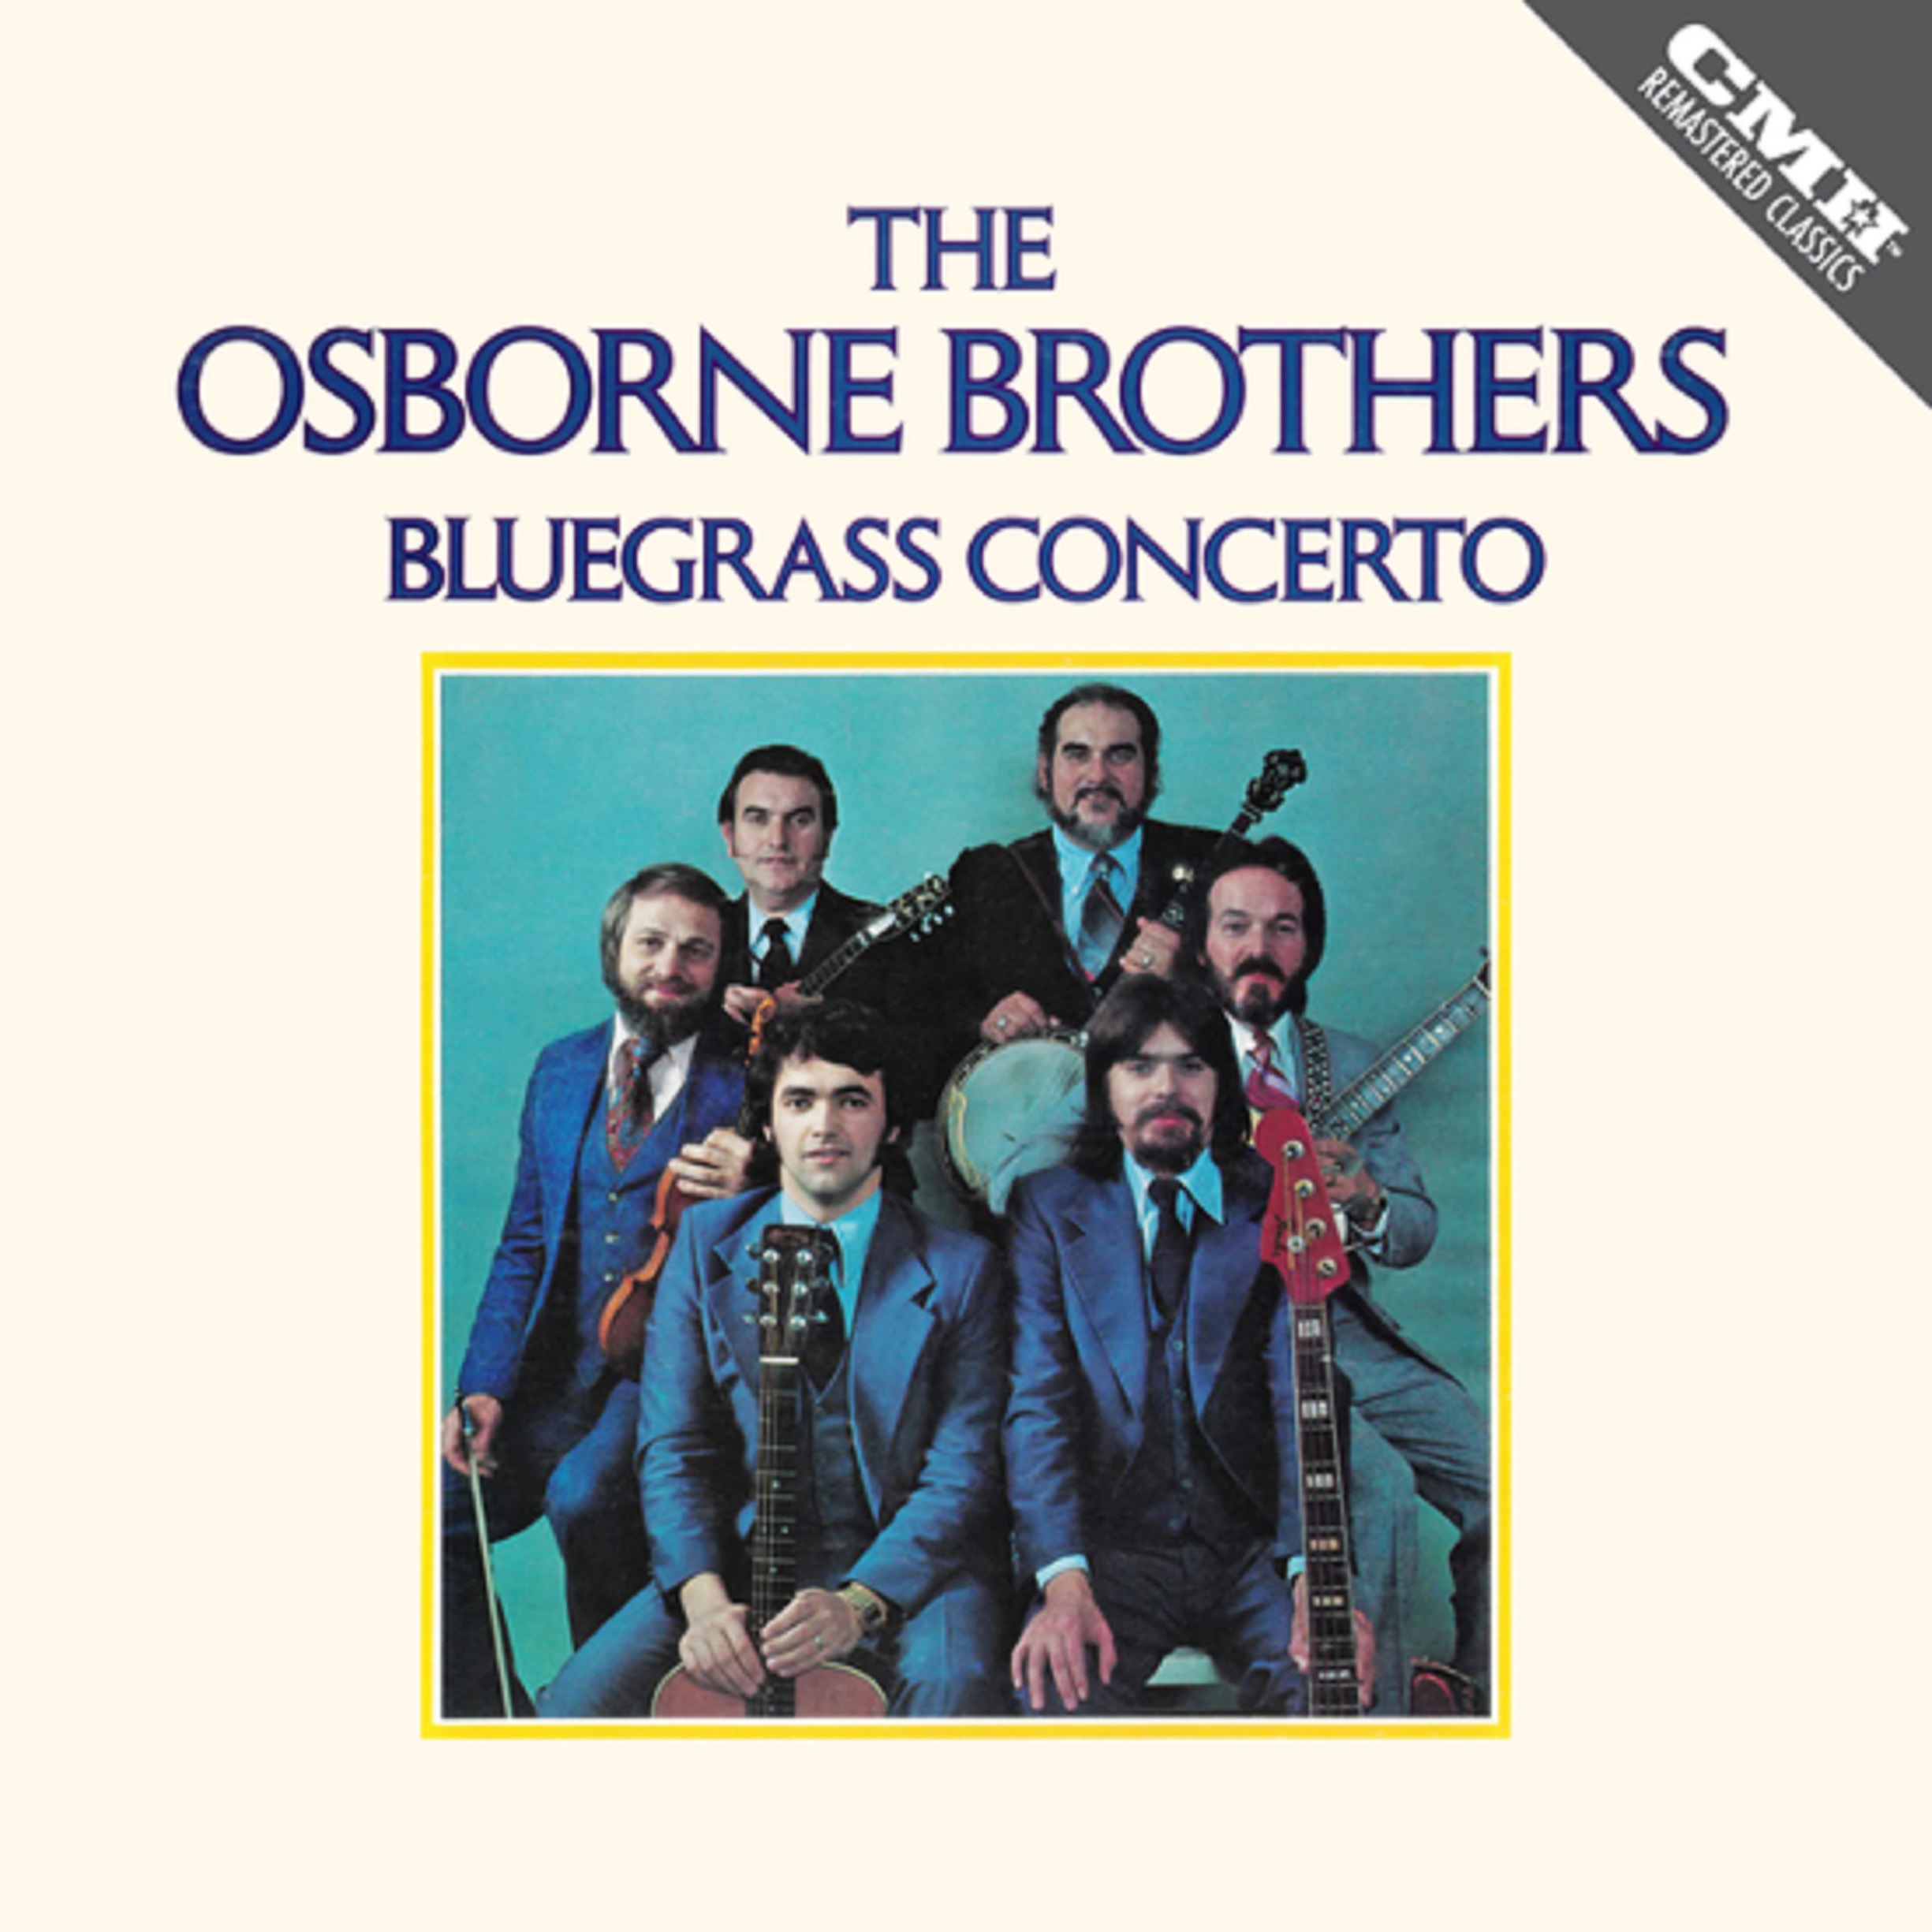 CMH Records Releases The Osborne Brothers’ 'Bluegrass Concerto' For The First Time On Digital And Streaming